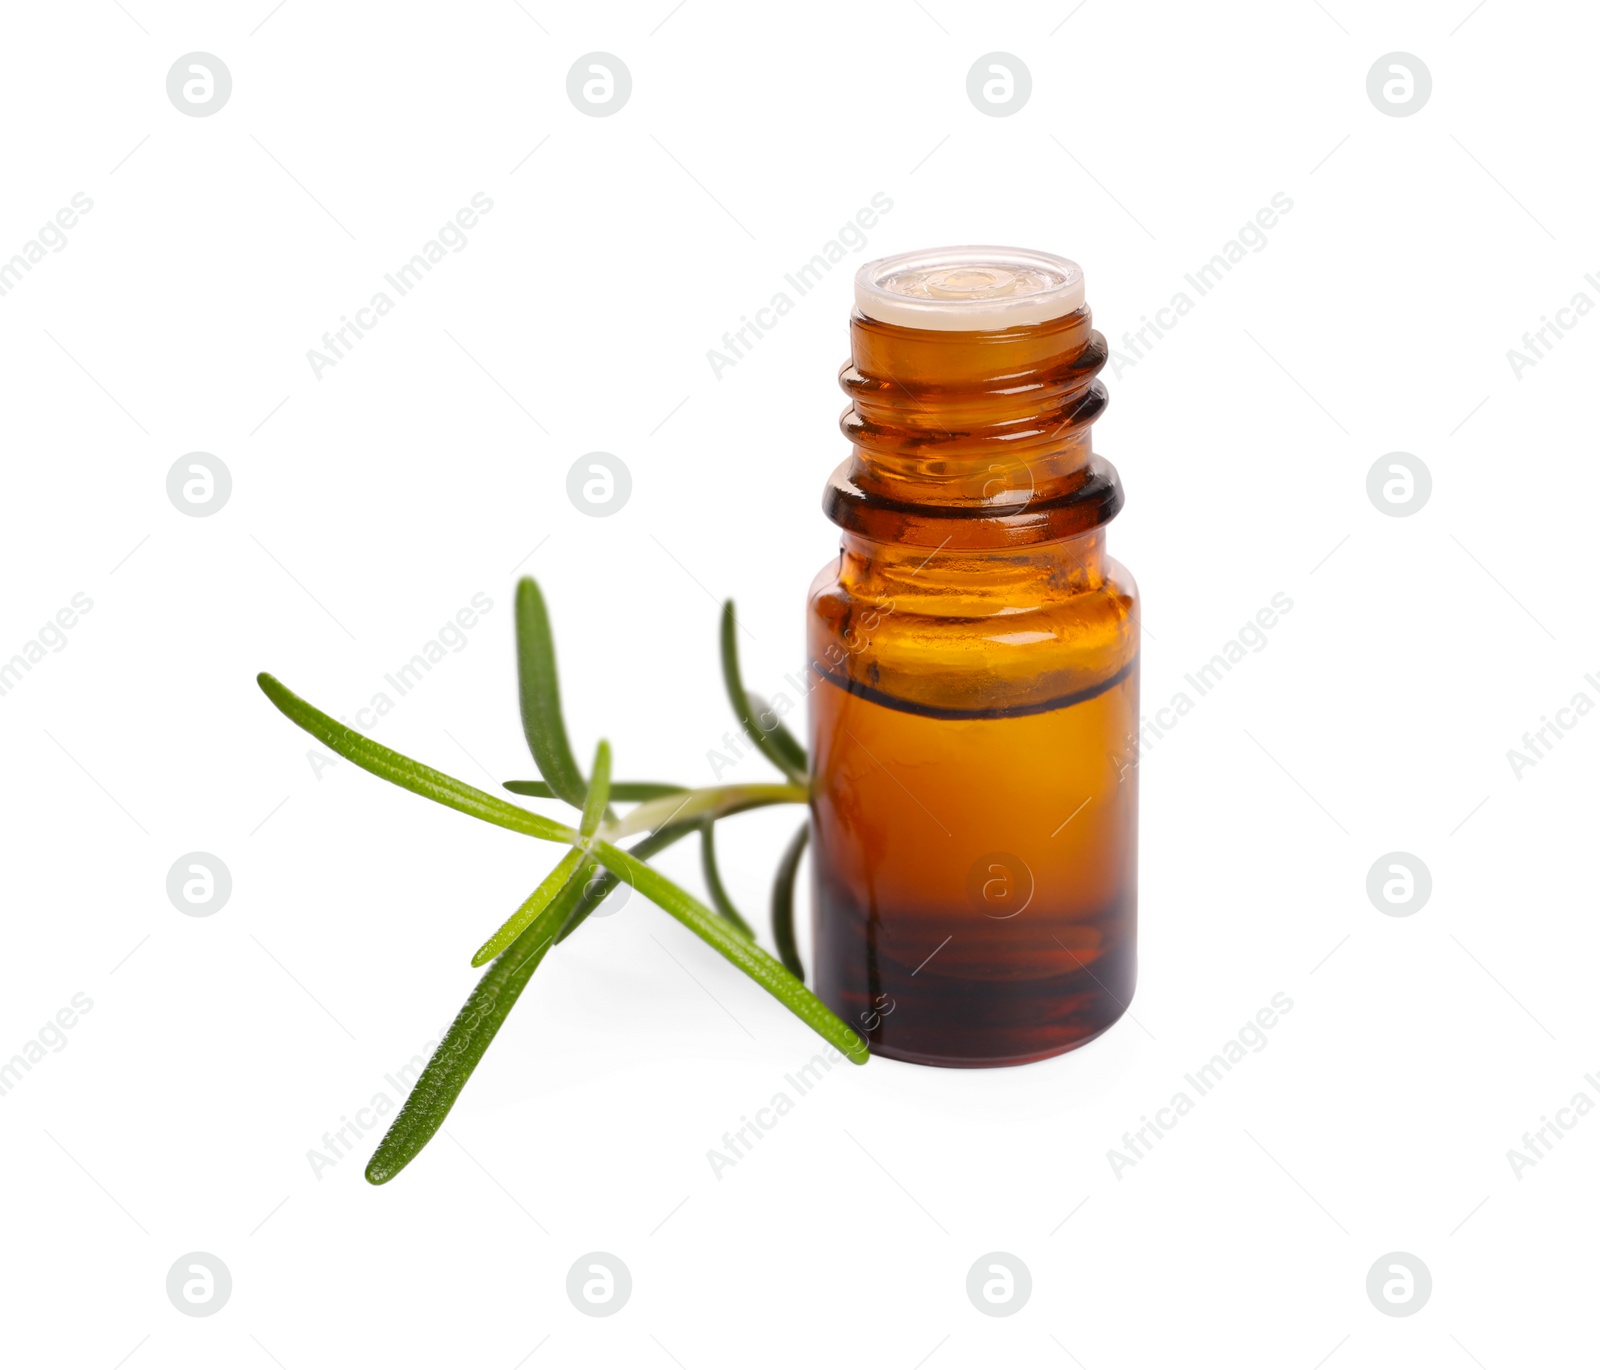 Photo of Sprig of fresh rosemary and essential oil on white background